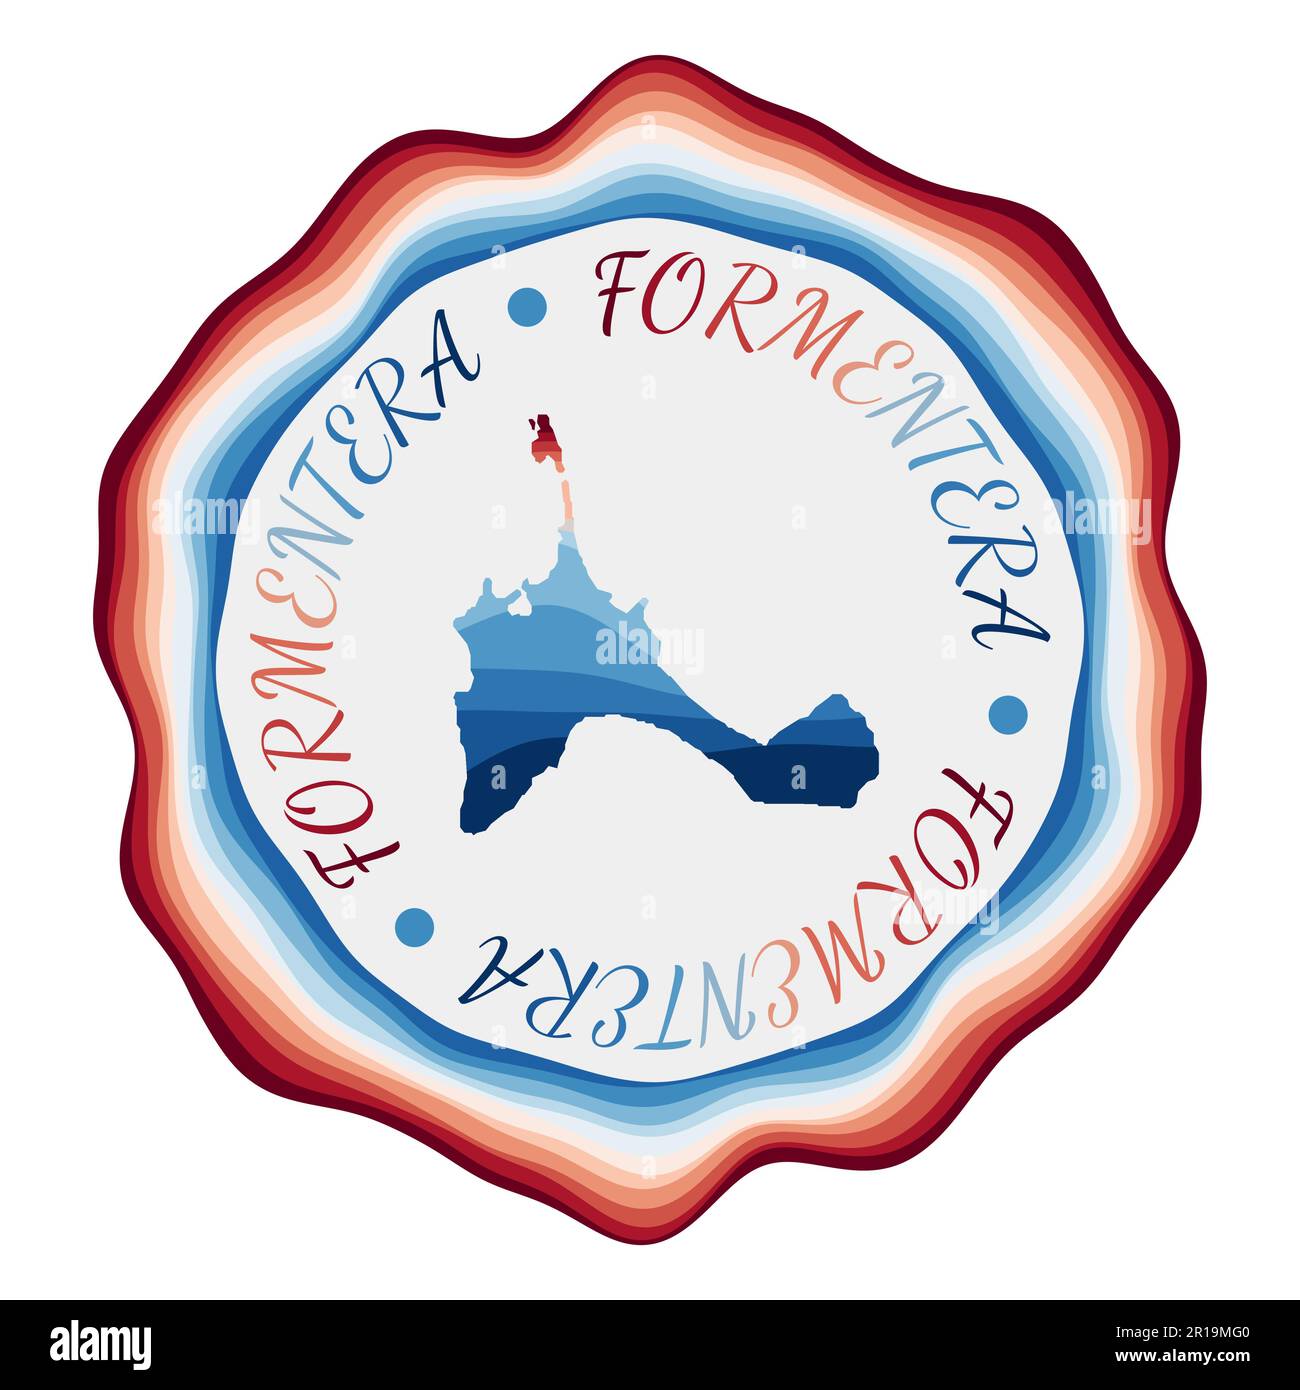 Formentera badge. Map of the island with beautiful geometric waves and vibrant red blue frame. Vivid round Formentera logo. Vector illustration. Stock Vector